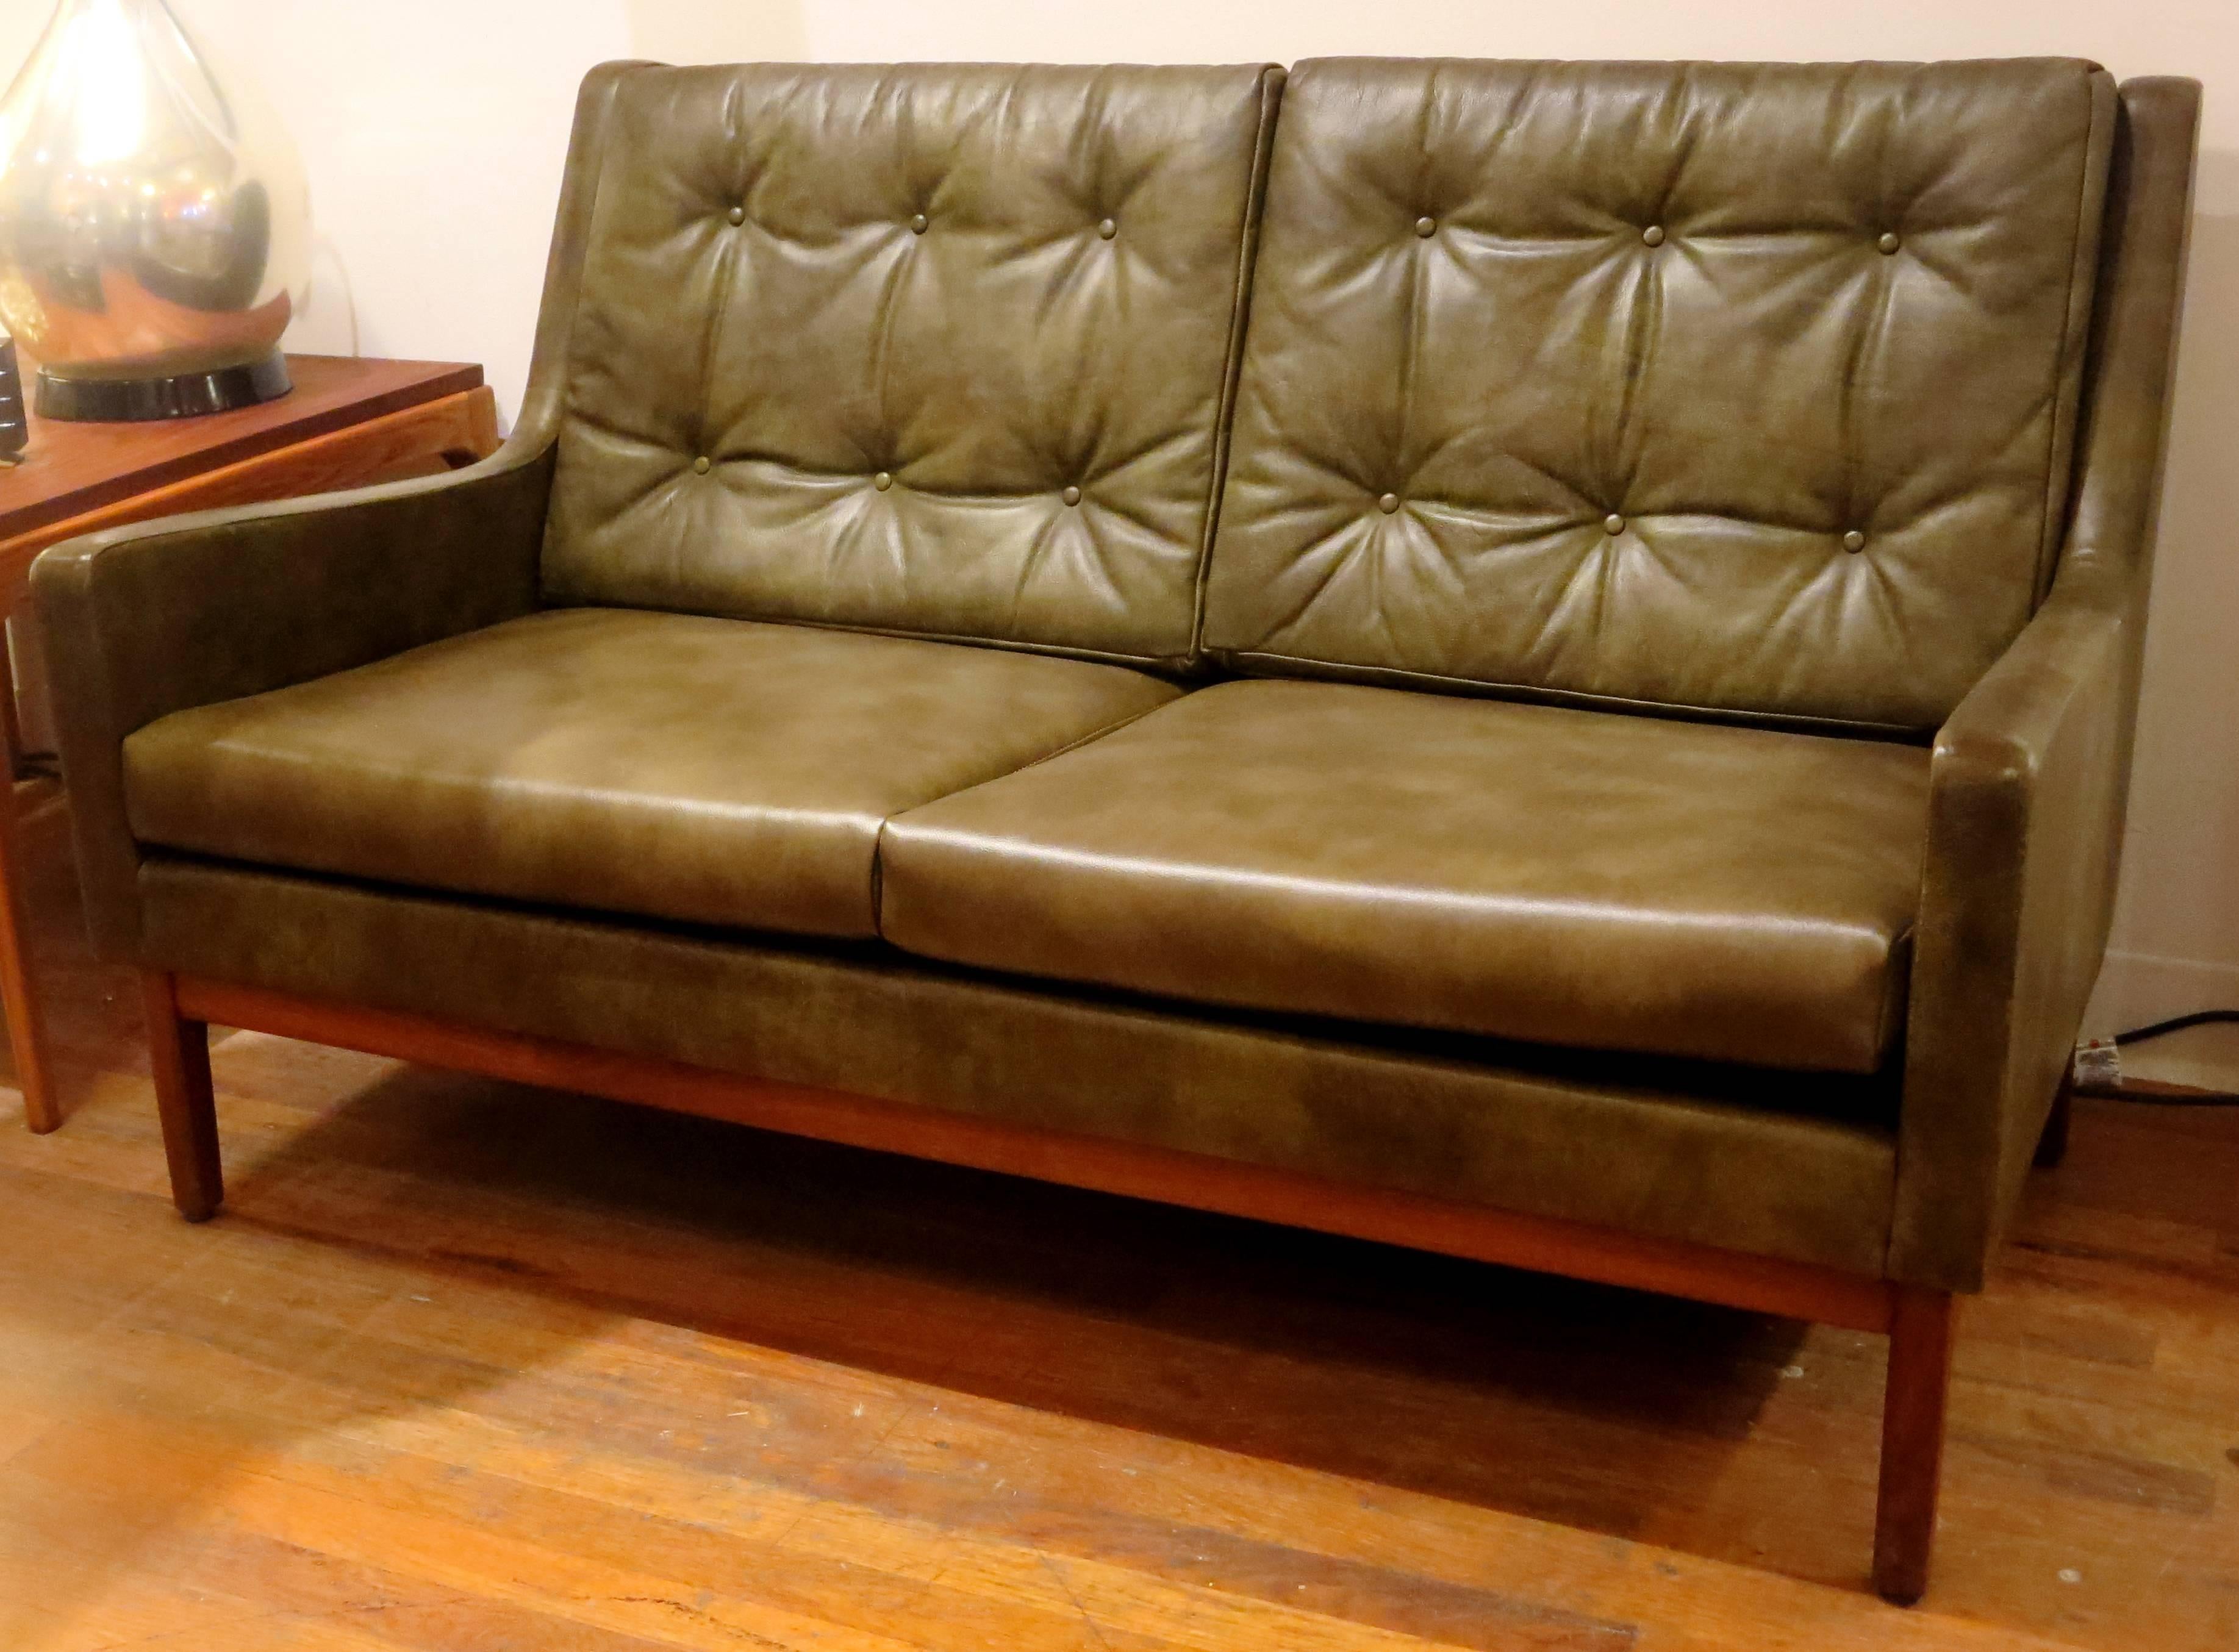 A very rare 1950s American modern loveseat by Gunlocke, in olive green leather, with tufted back cushions and solid walnut base frame, all in original condition, nicely worn some scuffs and marks on the back corners and upper top as shown, the base